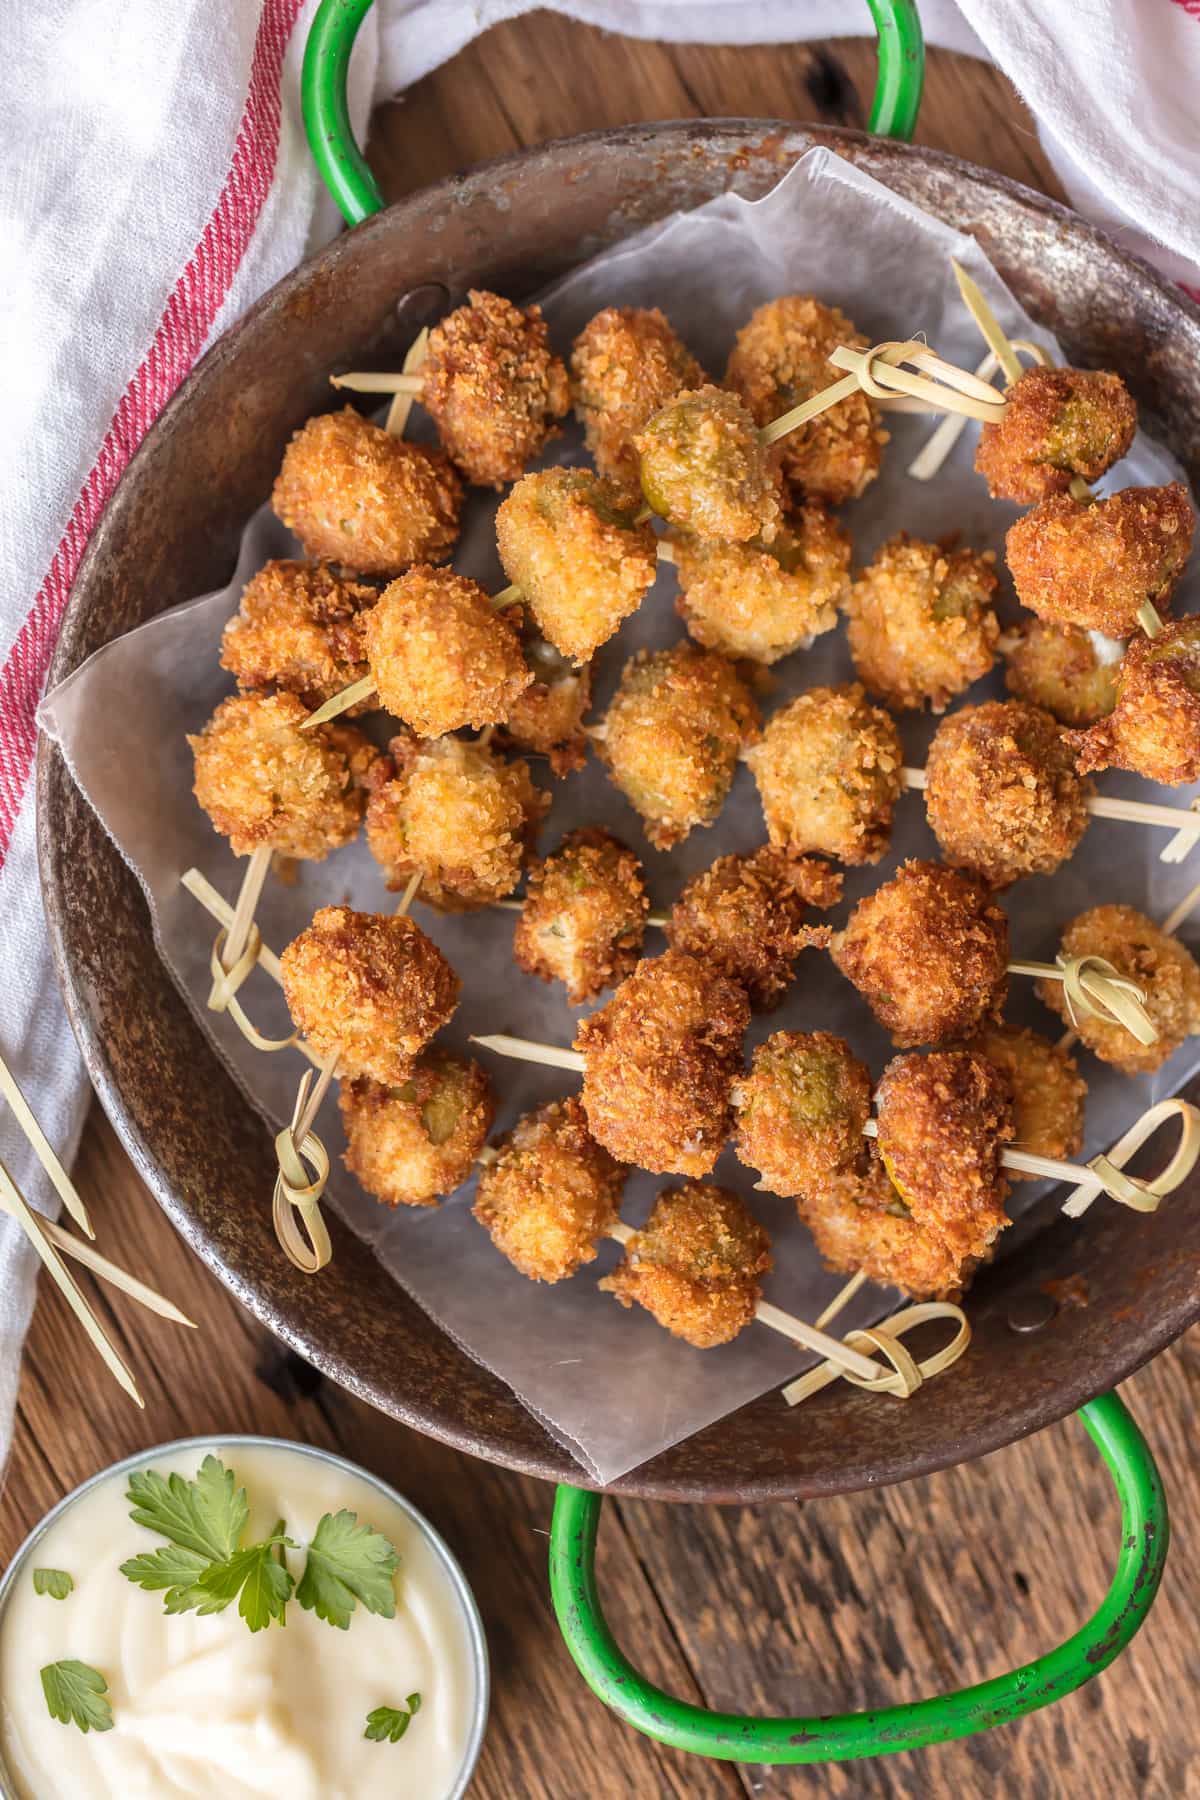 Fried Blue Cheese Stuffed Olives with Garlic Aioli The